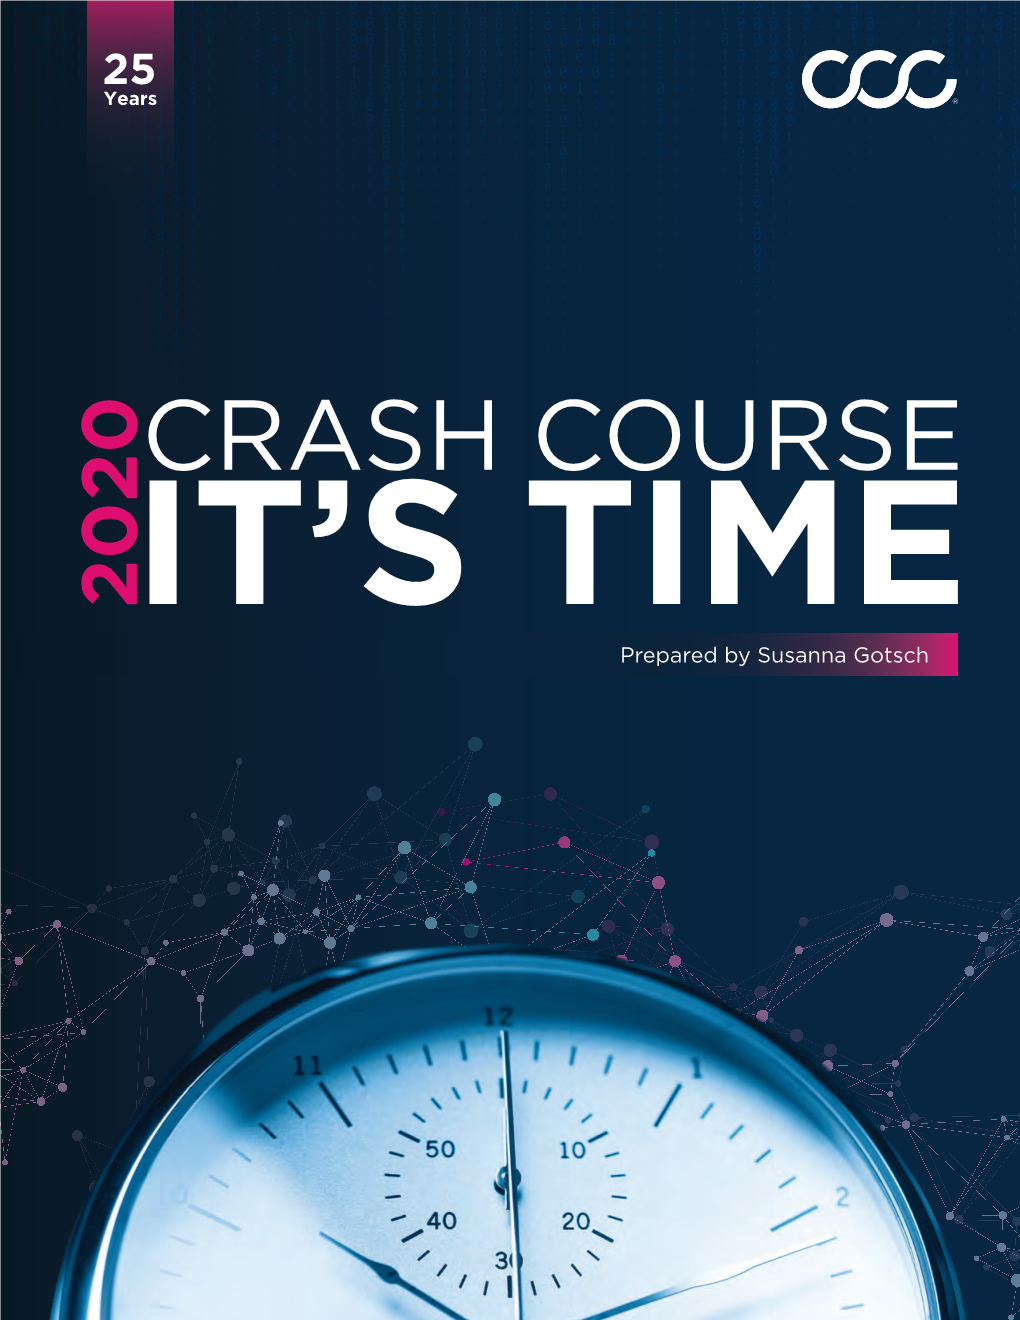 Crash Course 2020 Is ‘IT’S TIME,’ Intended to Draw Attention to What • Insights We Deliver Must Be Worthy of Trust, Predictable, and Actionable